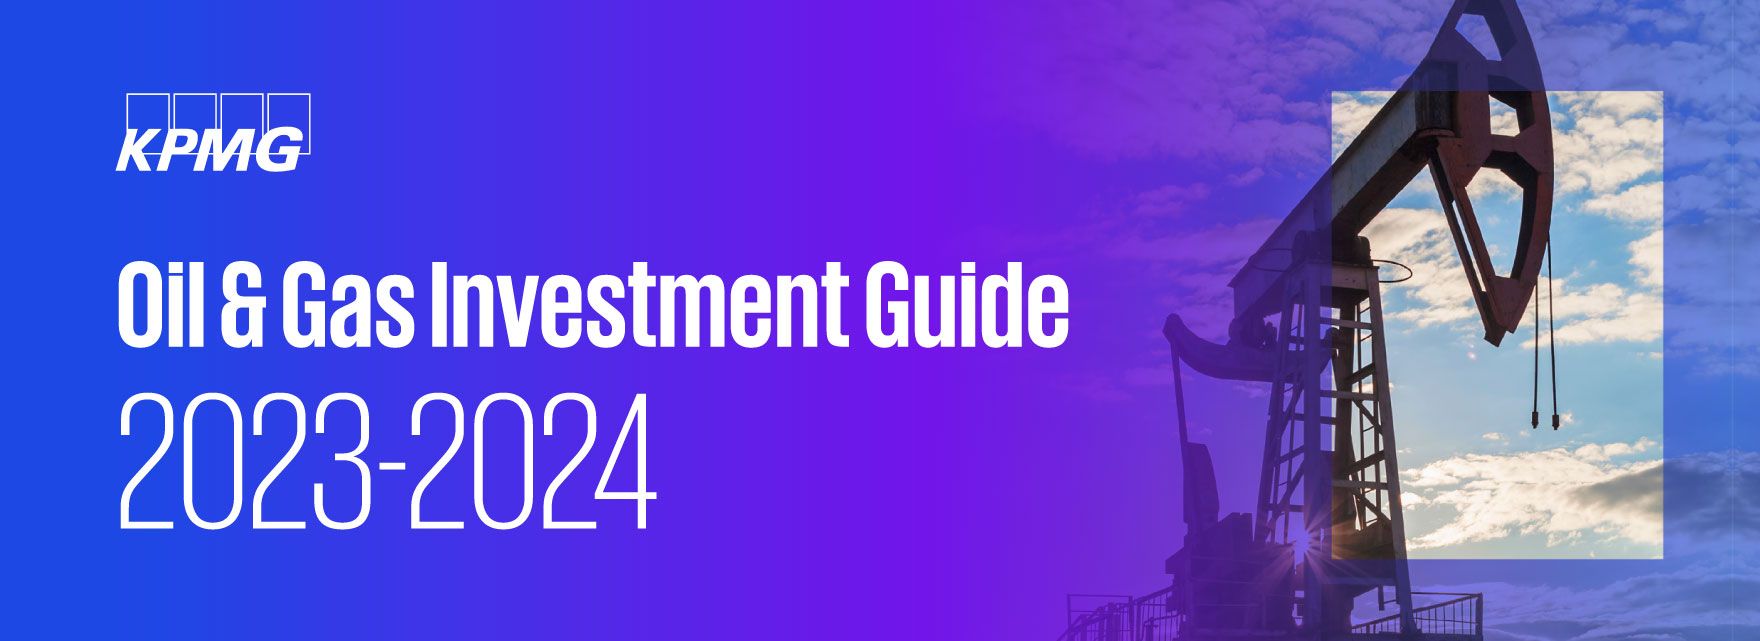 Oil & Gas Investment Guide 2023-2024